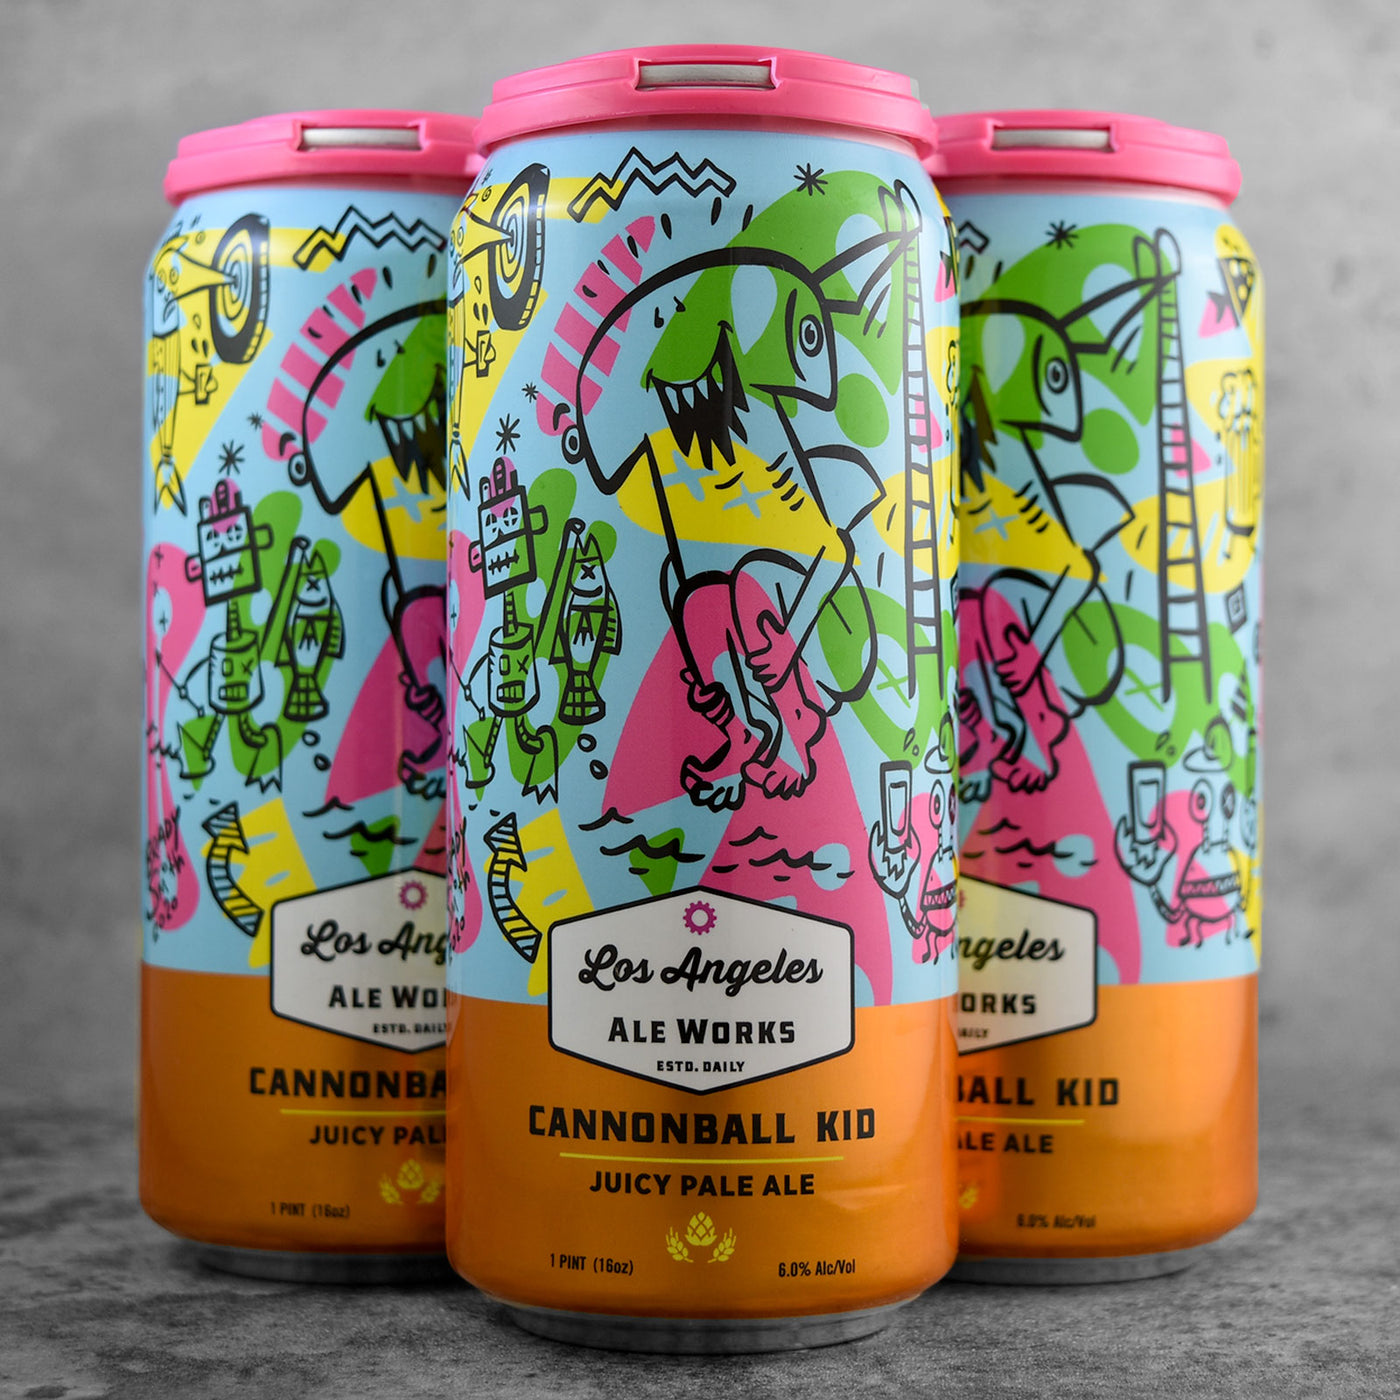 Los Angeles Ale Works Cannonball Kid